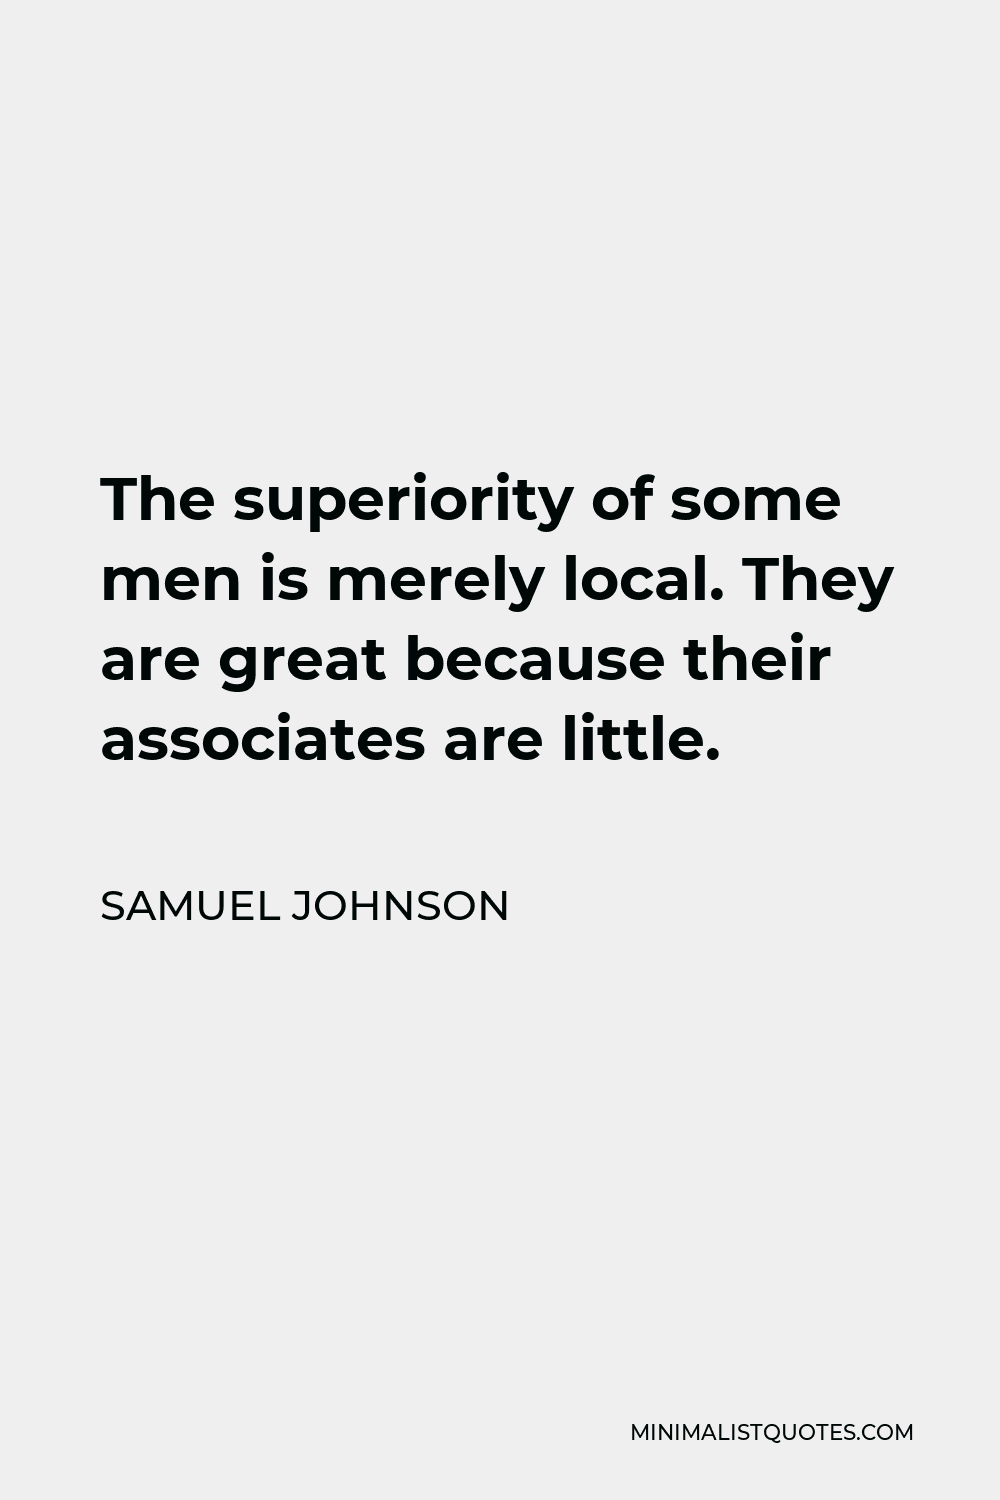 Samuel Johnson Quote - The superiority of some men is merely local. They are great because their associates are little.